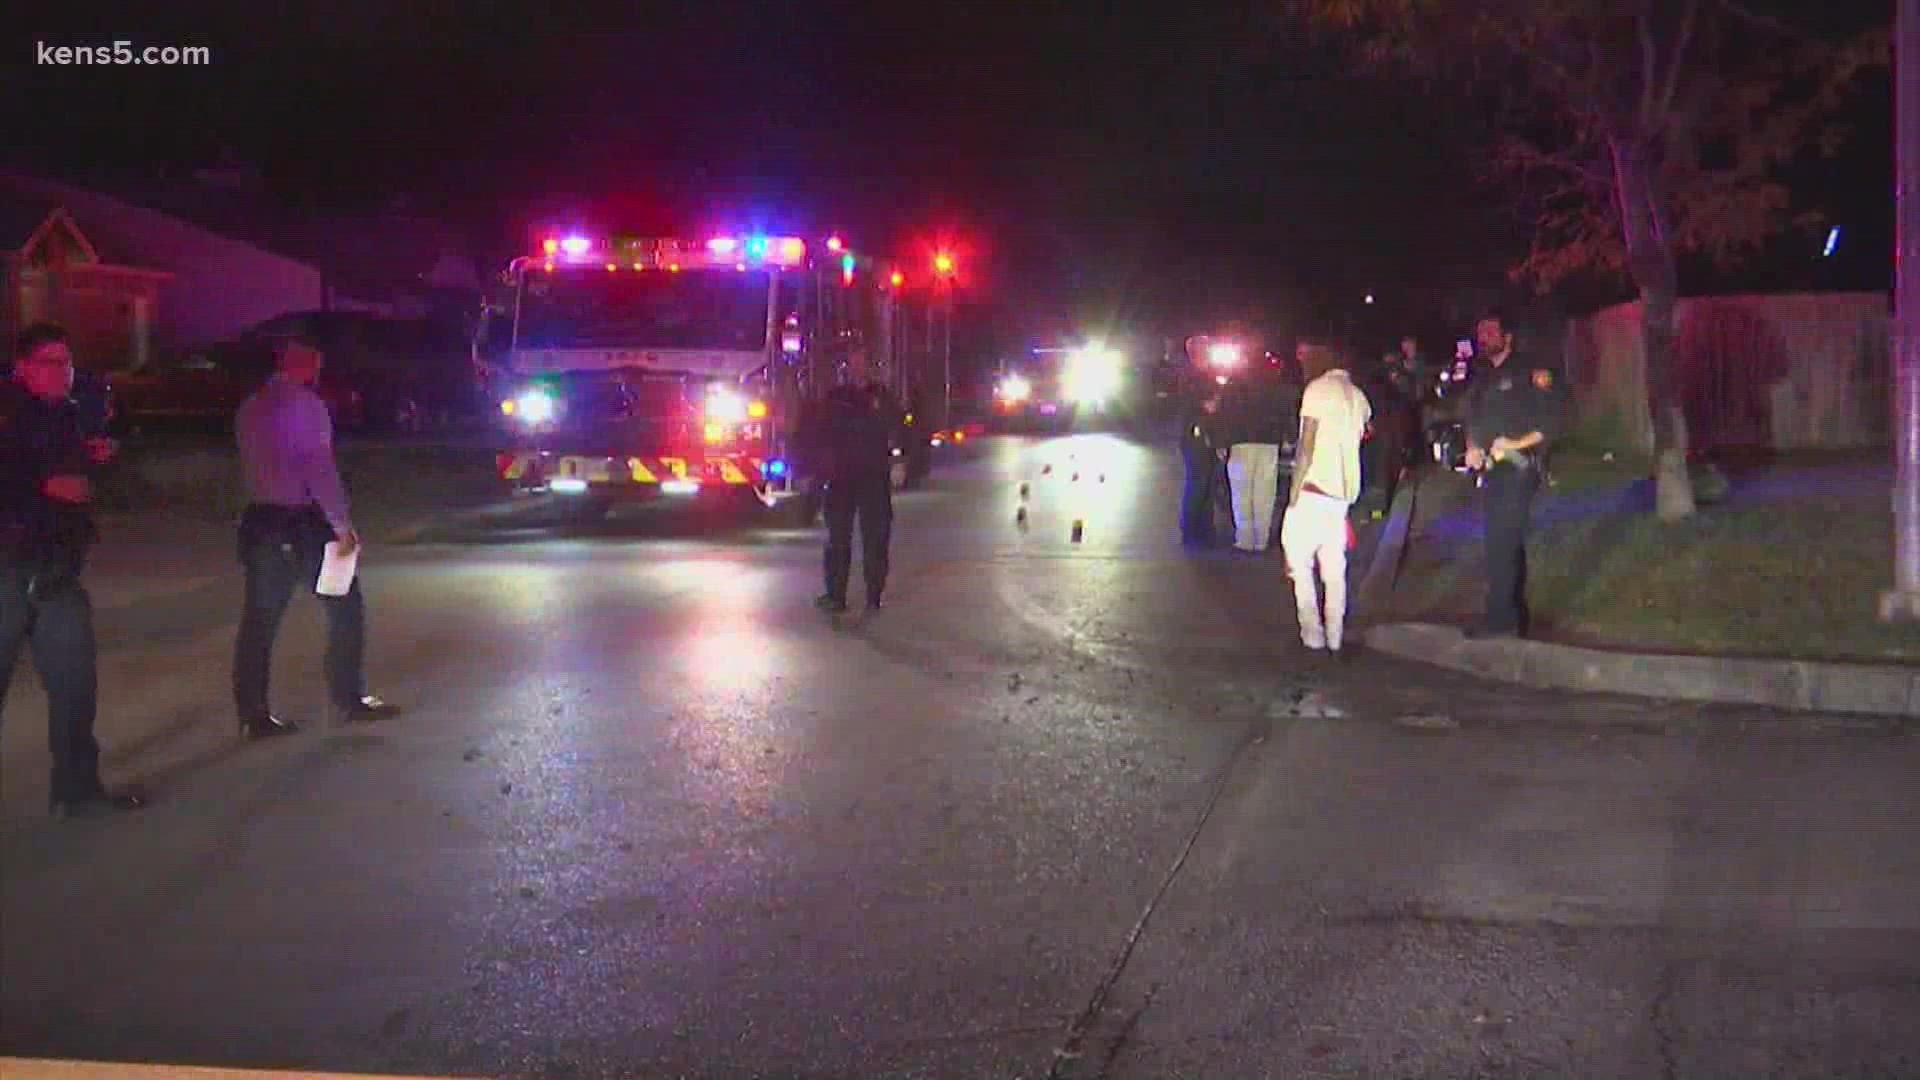 Three people including a teenager were injured in the shooting, San Antonio police say.